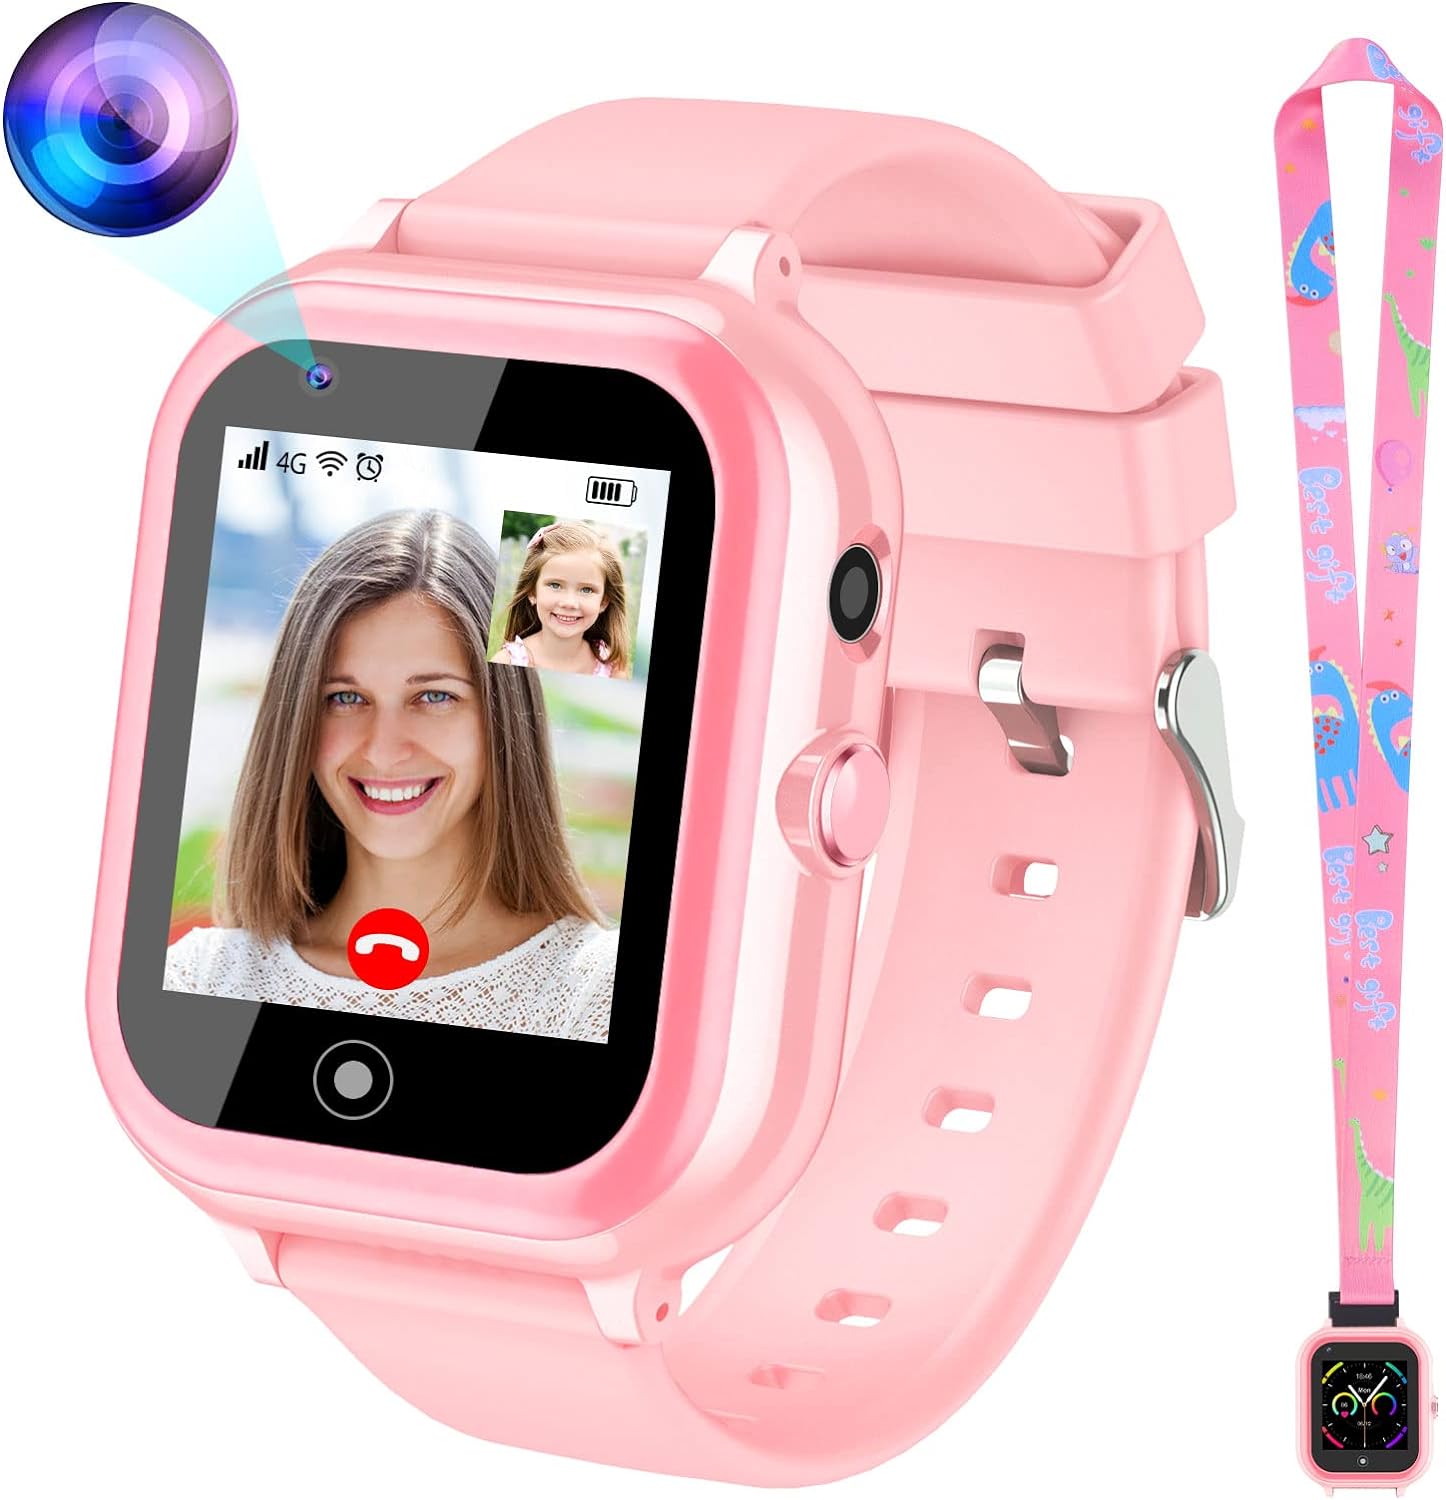 OKYUK Kids Smart Watches Boys Girls Ages 3-15 Kids GPS Tracker Waterproof 1.3 Touchscreen Watch with SIM Card SOS Two Way Call Voice Chat Christmas Birthday Gift for 3-15 Year Old Boys Girls